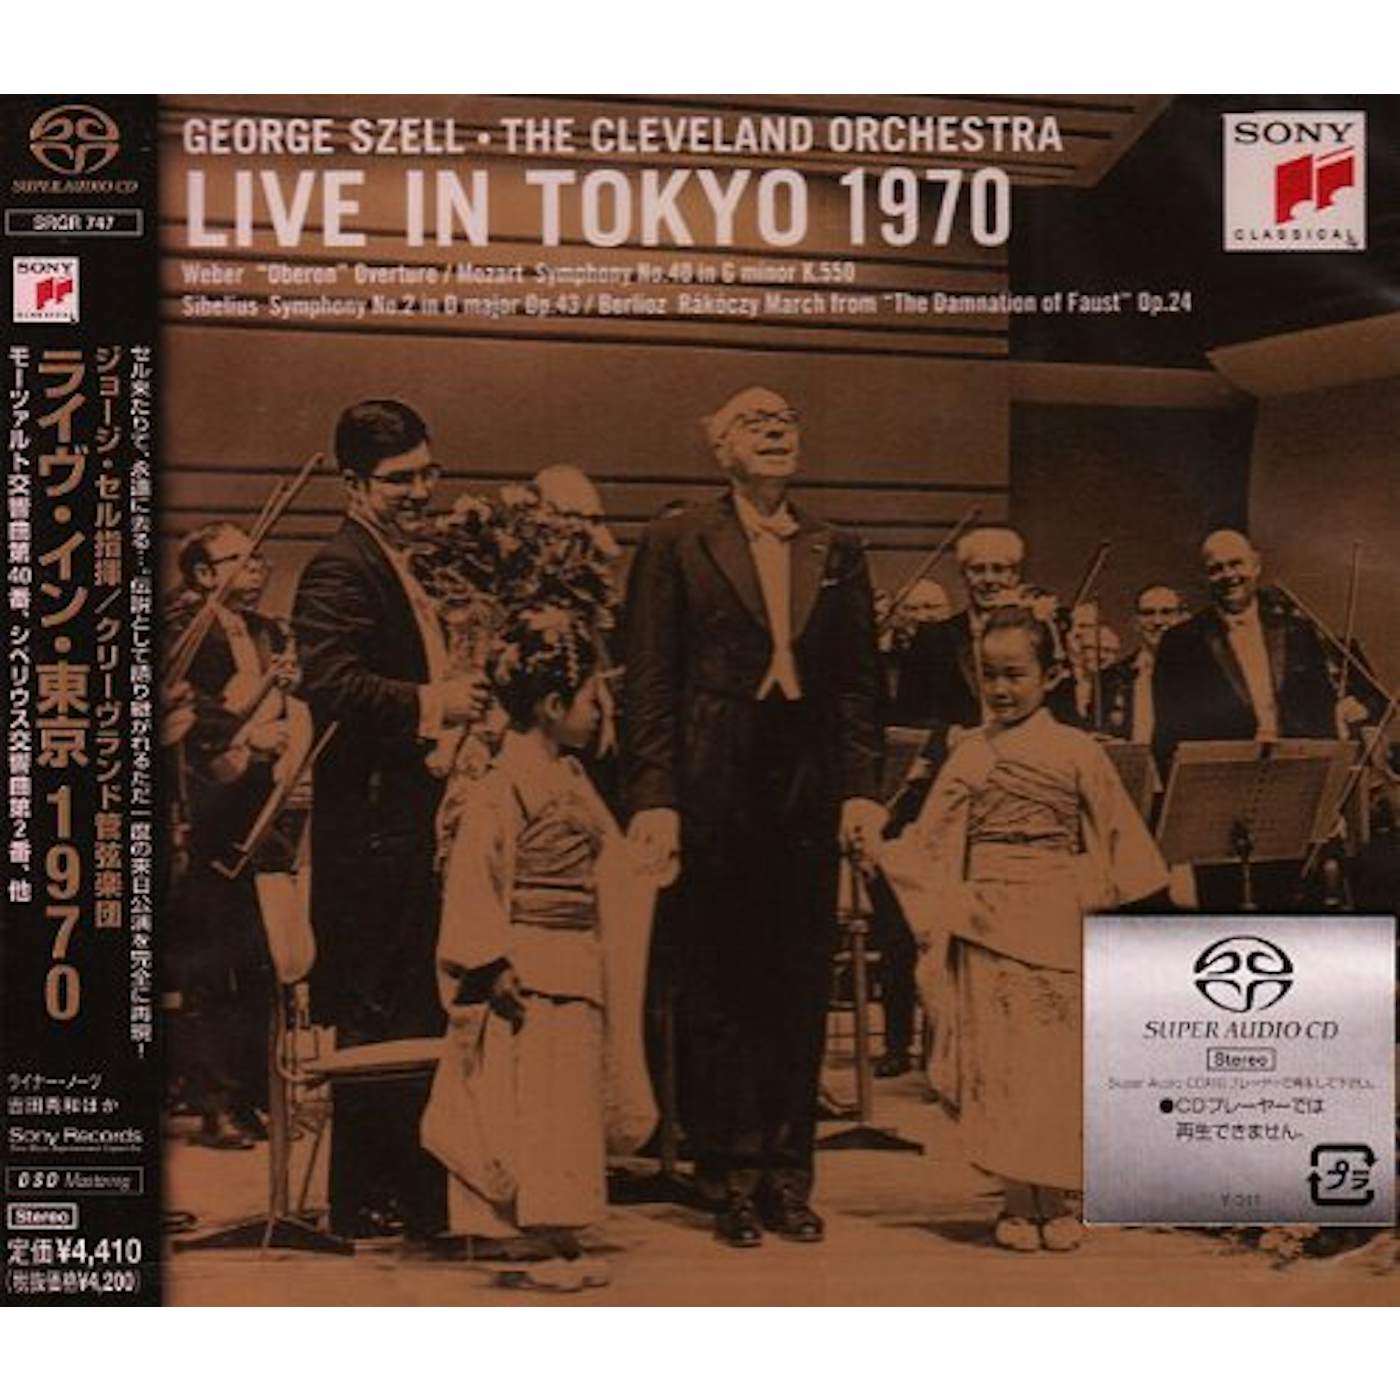 George Szell LIVE IN TOKYO 1970 Vinyl Record